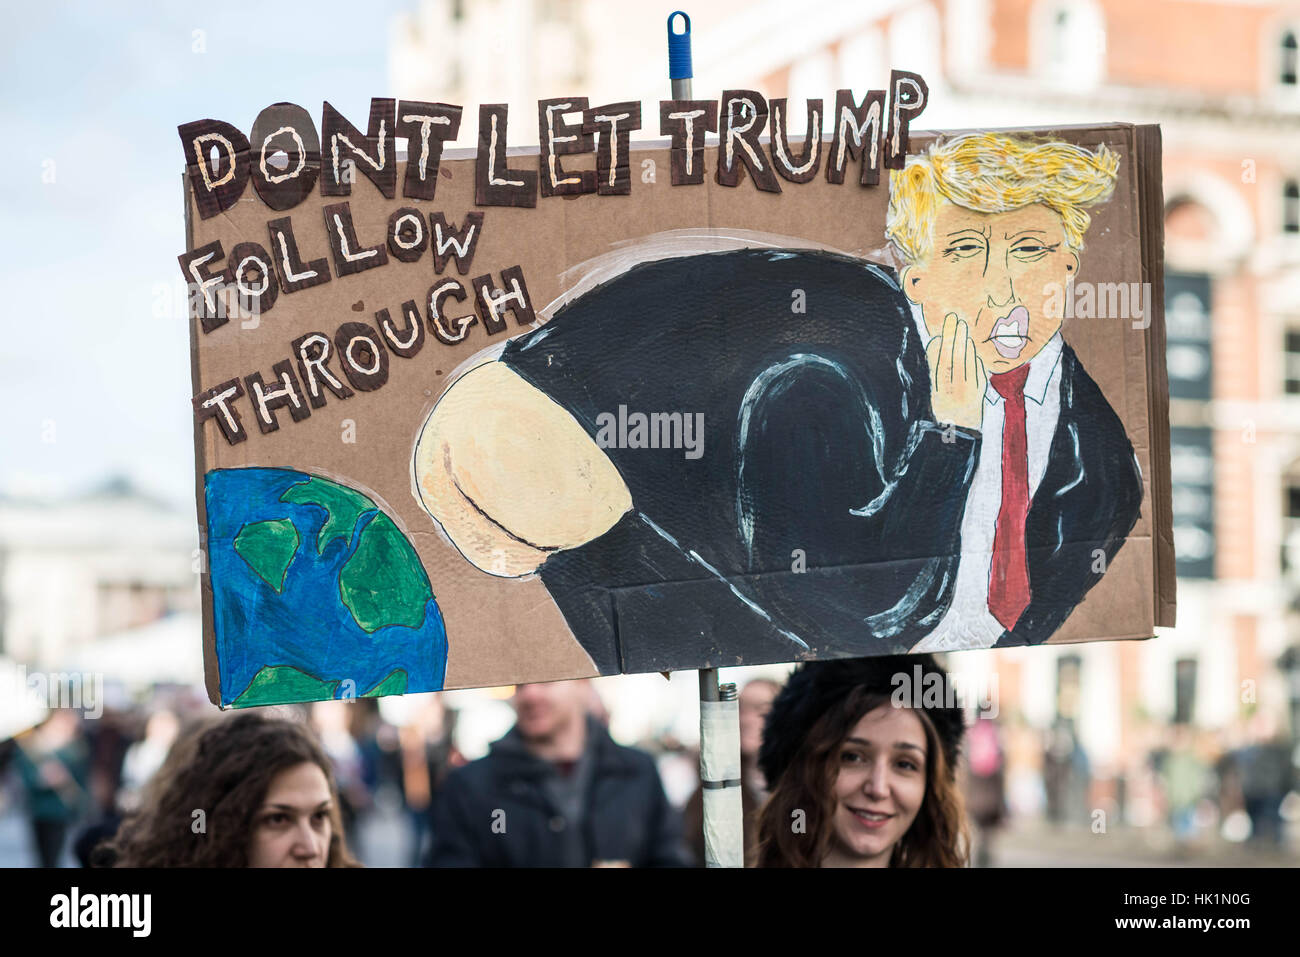 London, UK. 4th February, 2017. ‘Stop Trump’s Muslim Ban’ Thousands of supporters march and demonstrate through central London with anti-Trump placards and humorous slogans against US President Donald Trump's recent executive order limiting seven Muslim-majority countries entry to the USA. © Guy Corbishley/Alamy Live News Stock Photo